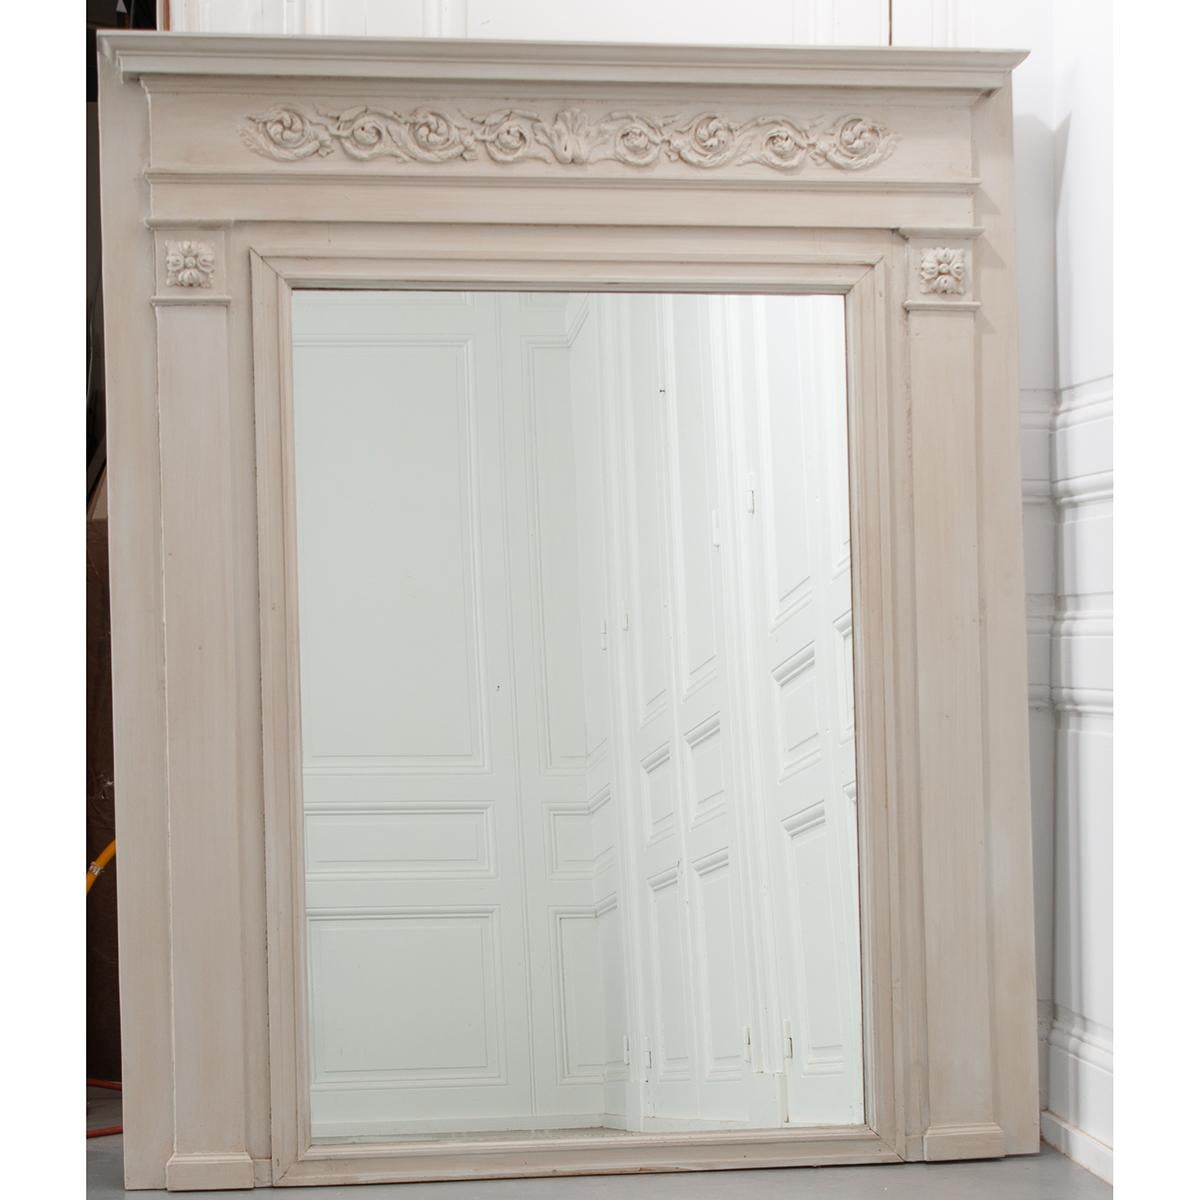 French, newly painted mirror of Boiserie from Rouen, France. This fine trumeau starts with a finished crown above a detailed scroll foliate pattern carved across the top of the mirror. The centered mirror plate has been replaced at some point and is